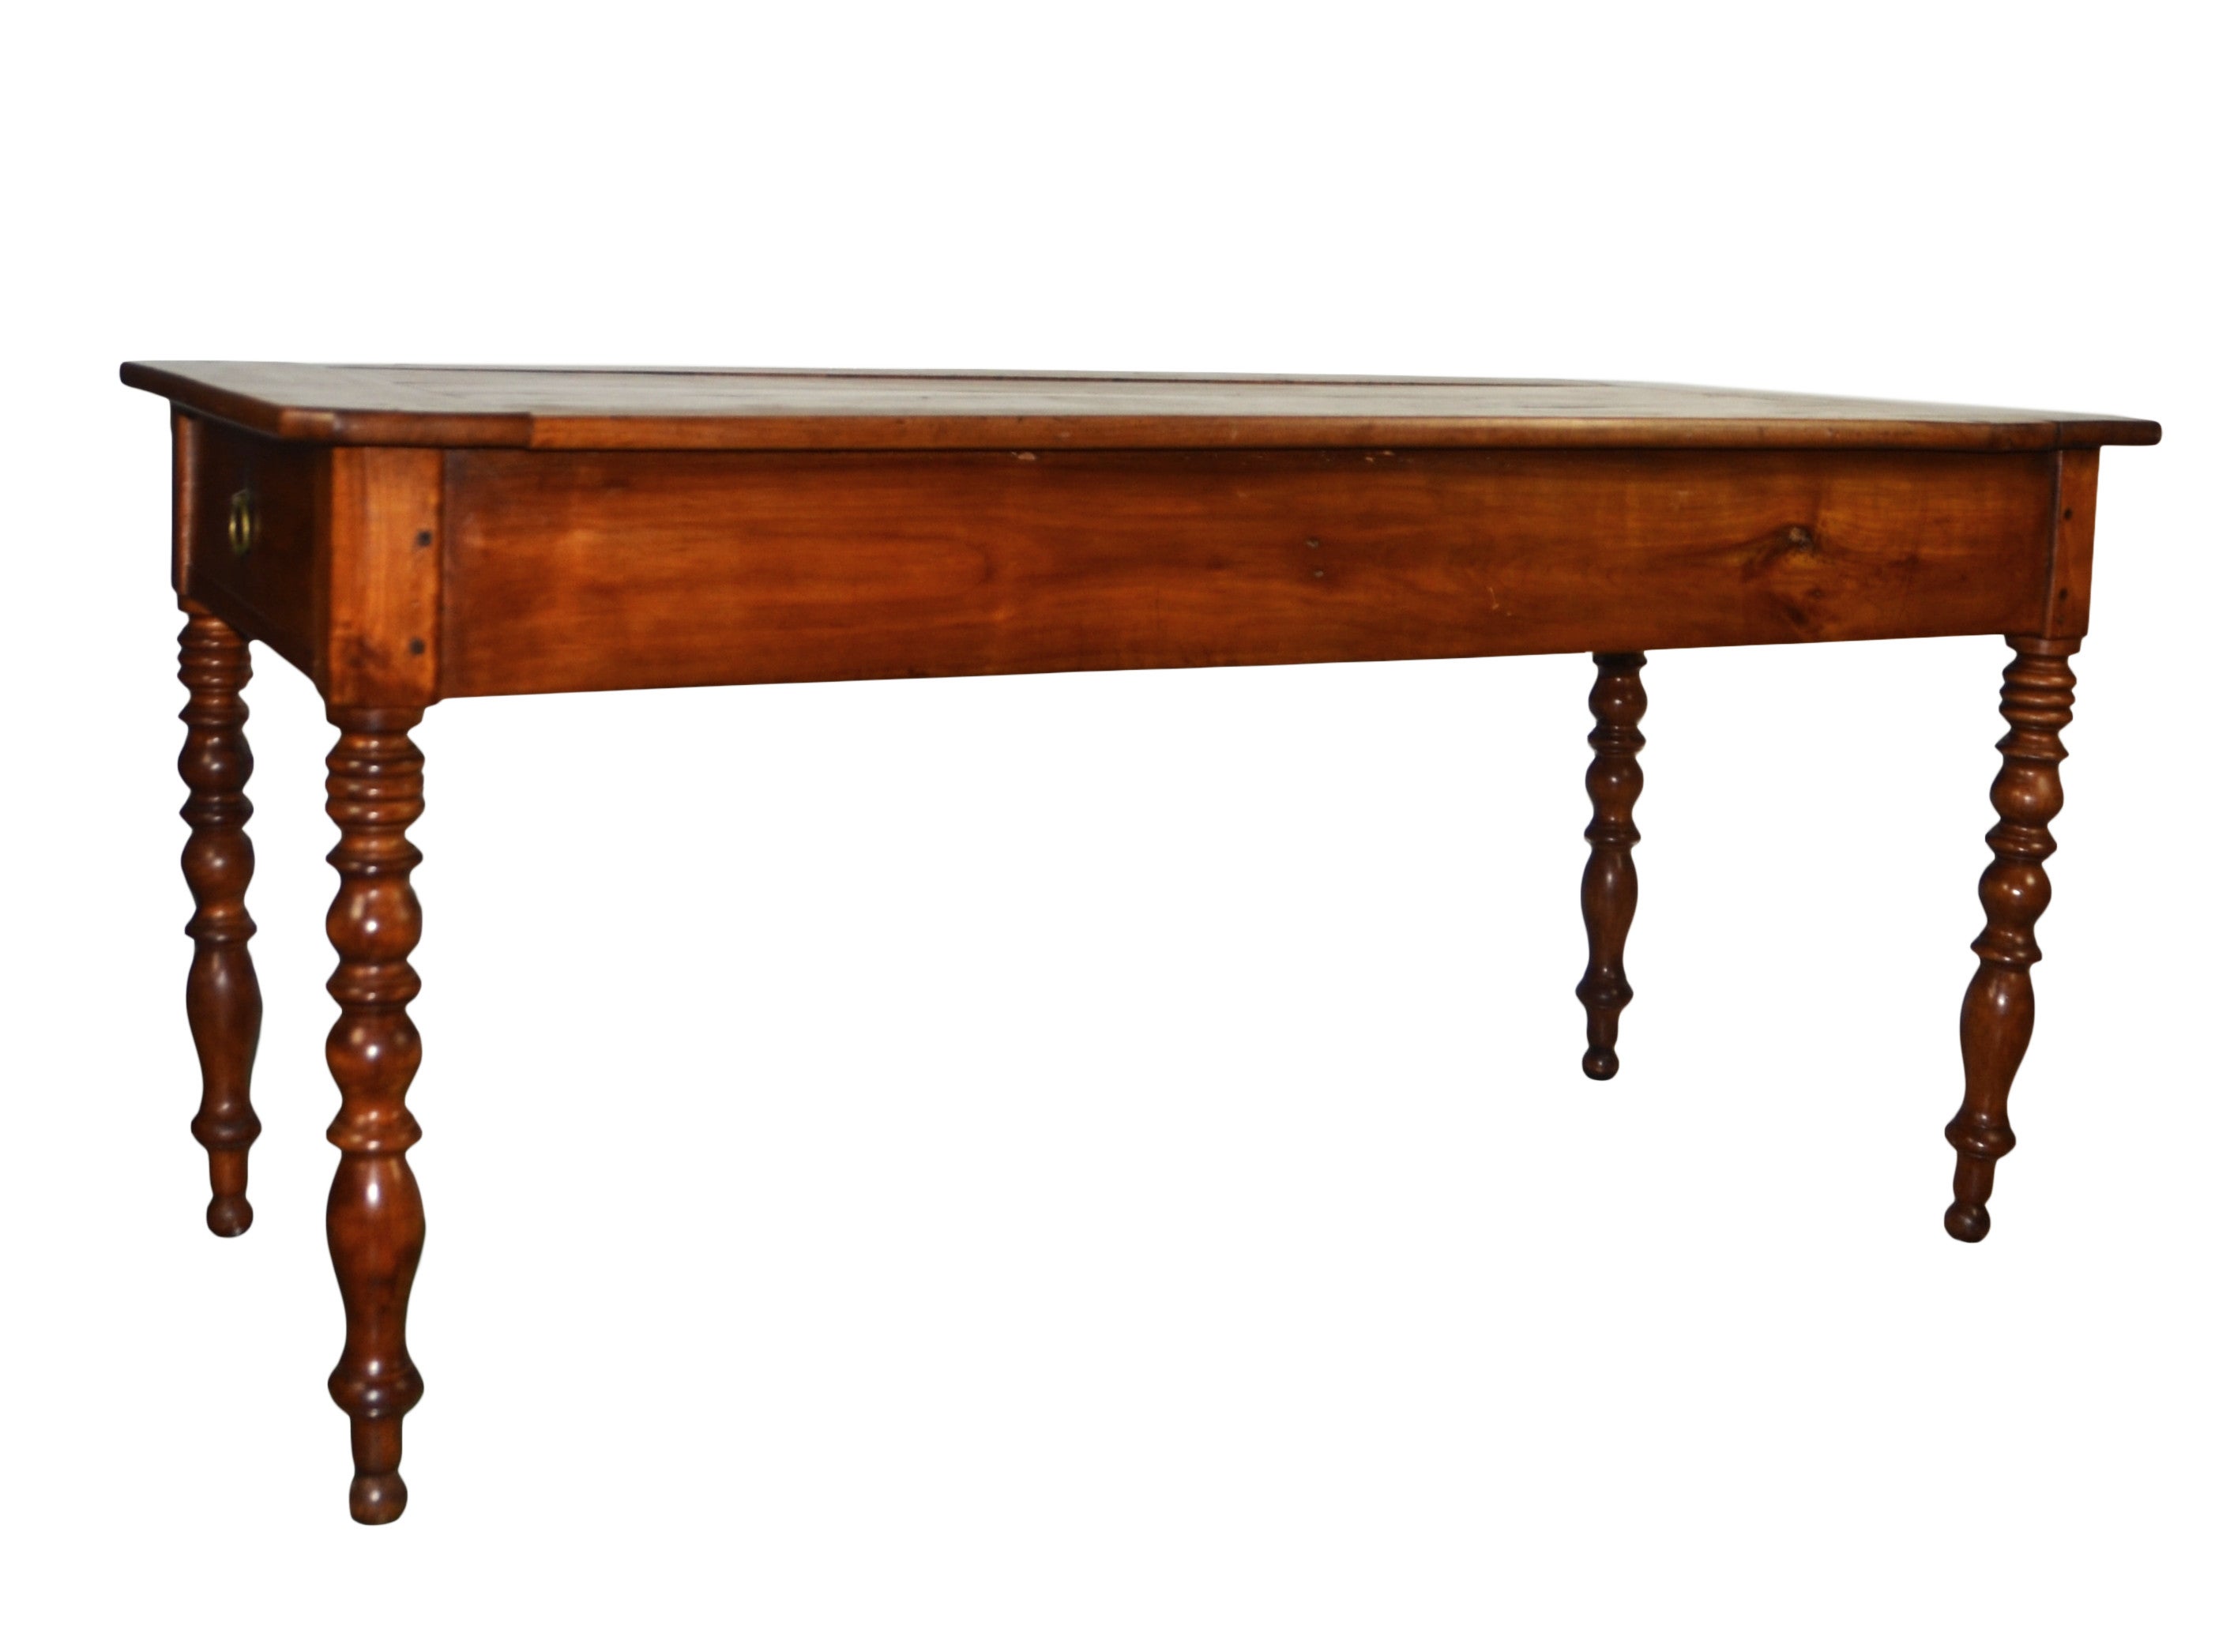 An original French Farm table in fruitwood. Exceptionally fine turned legs. Soft warm patina to the top. Drawer to each end, with original hardware and drawer liners. True survivor.